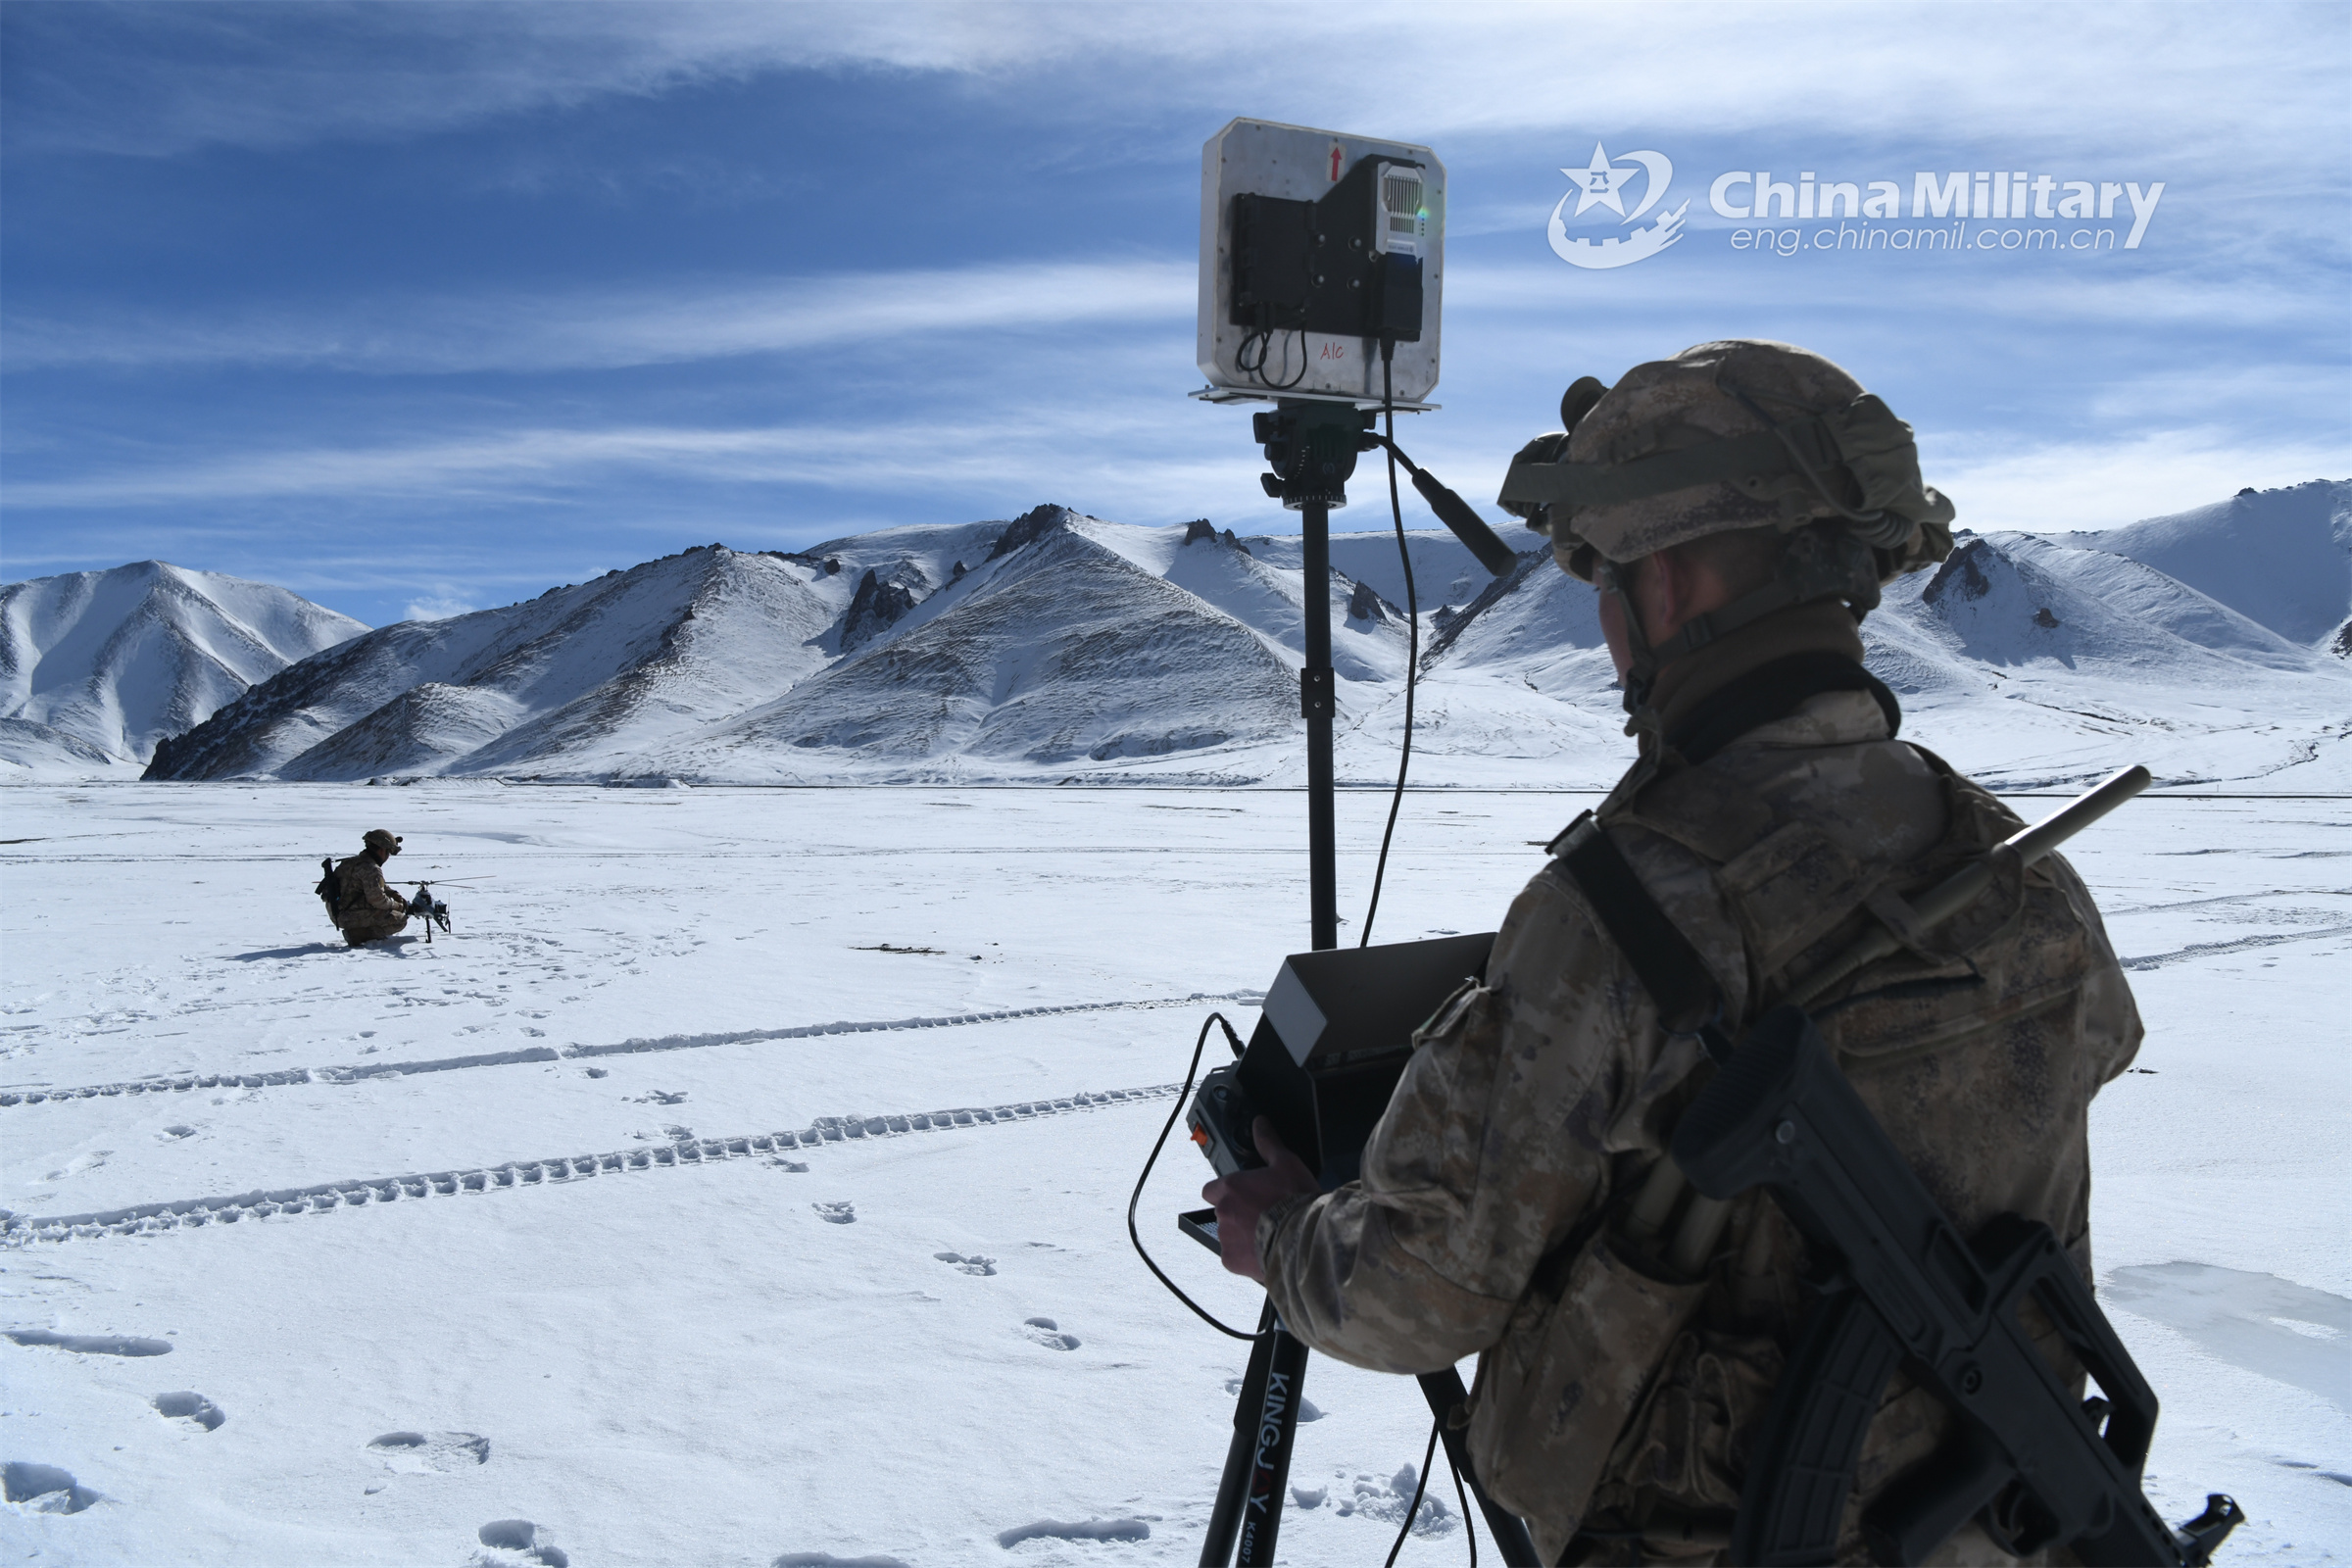 PLA soldiers practice reconnaissance skills in snowfield